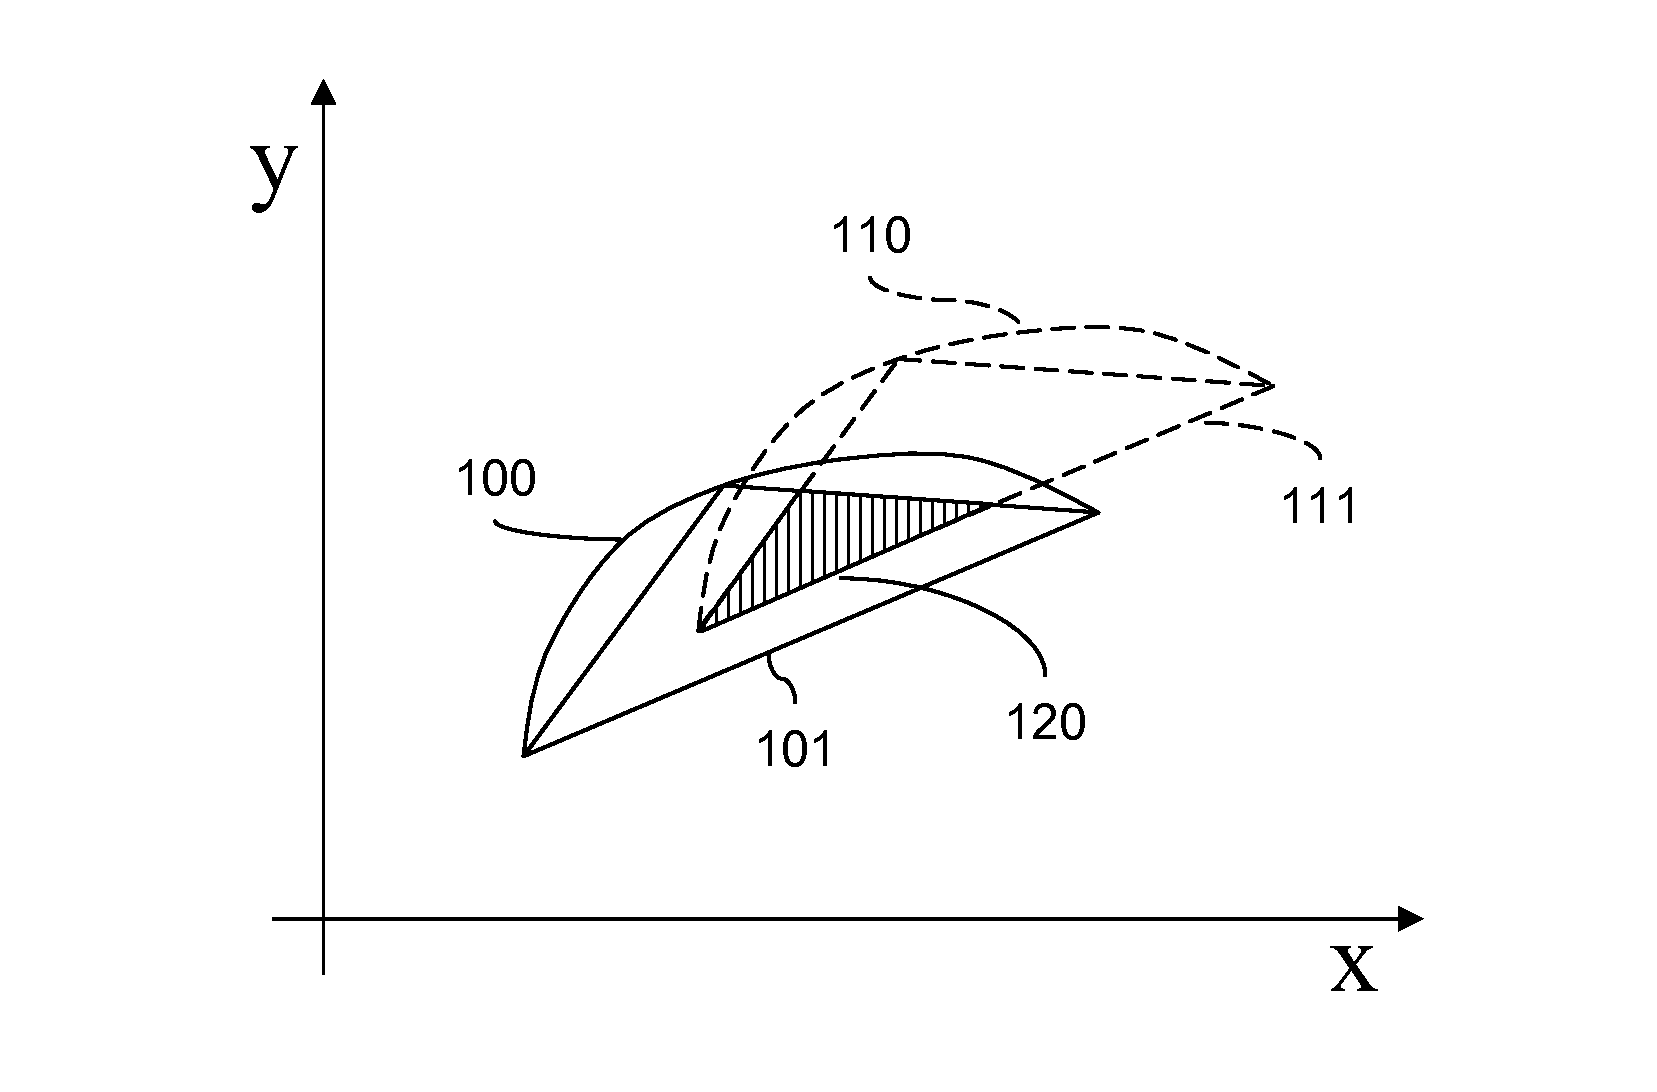 Electroluminescent device aging compensation with multilevel drive